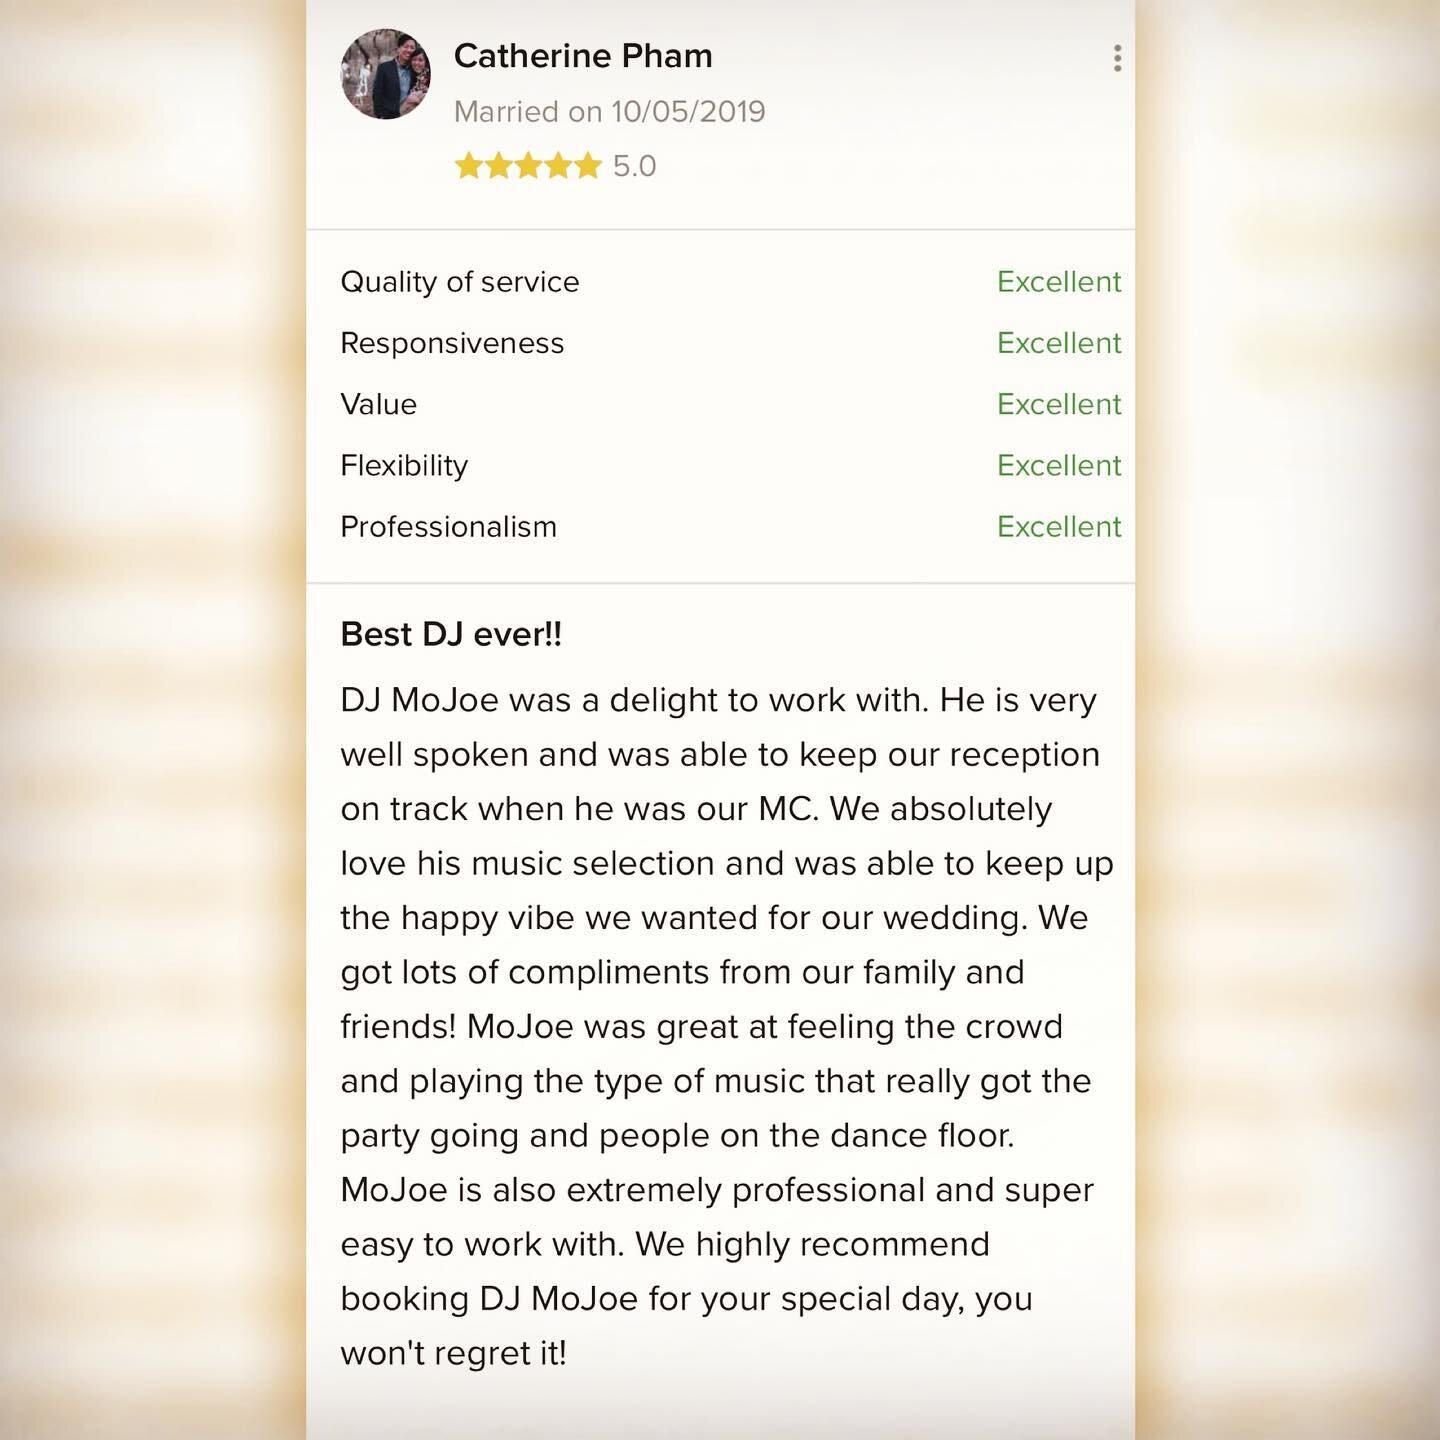 ⭐️⭐️⭐️⭐️⭐️ Creating unforgettable moments for my couples and their loved ones are all worth it! 🤩
.
Thank you, Cat &amp; Norman, for your review!! 🙏 
.
Happy to have been your DJ!! 🥳 (Oct. 5, 2019)
.
Swipe ⬅️ for more fun!! 🎉